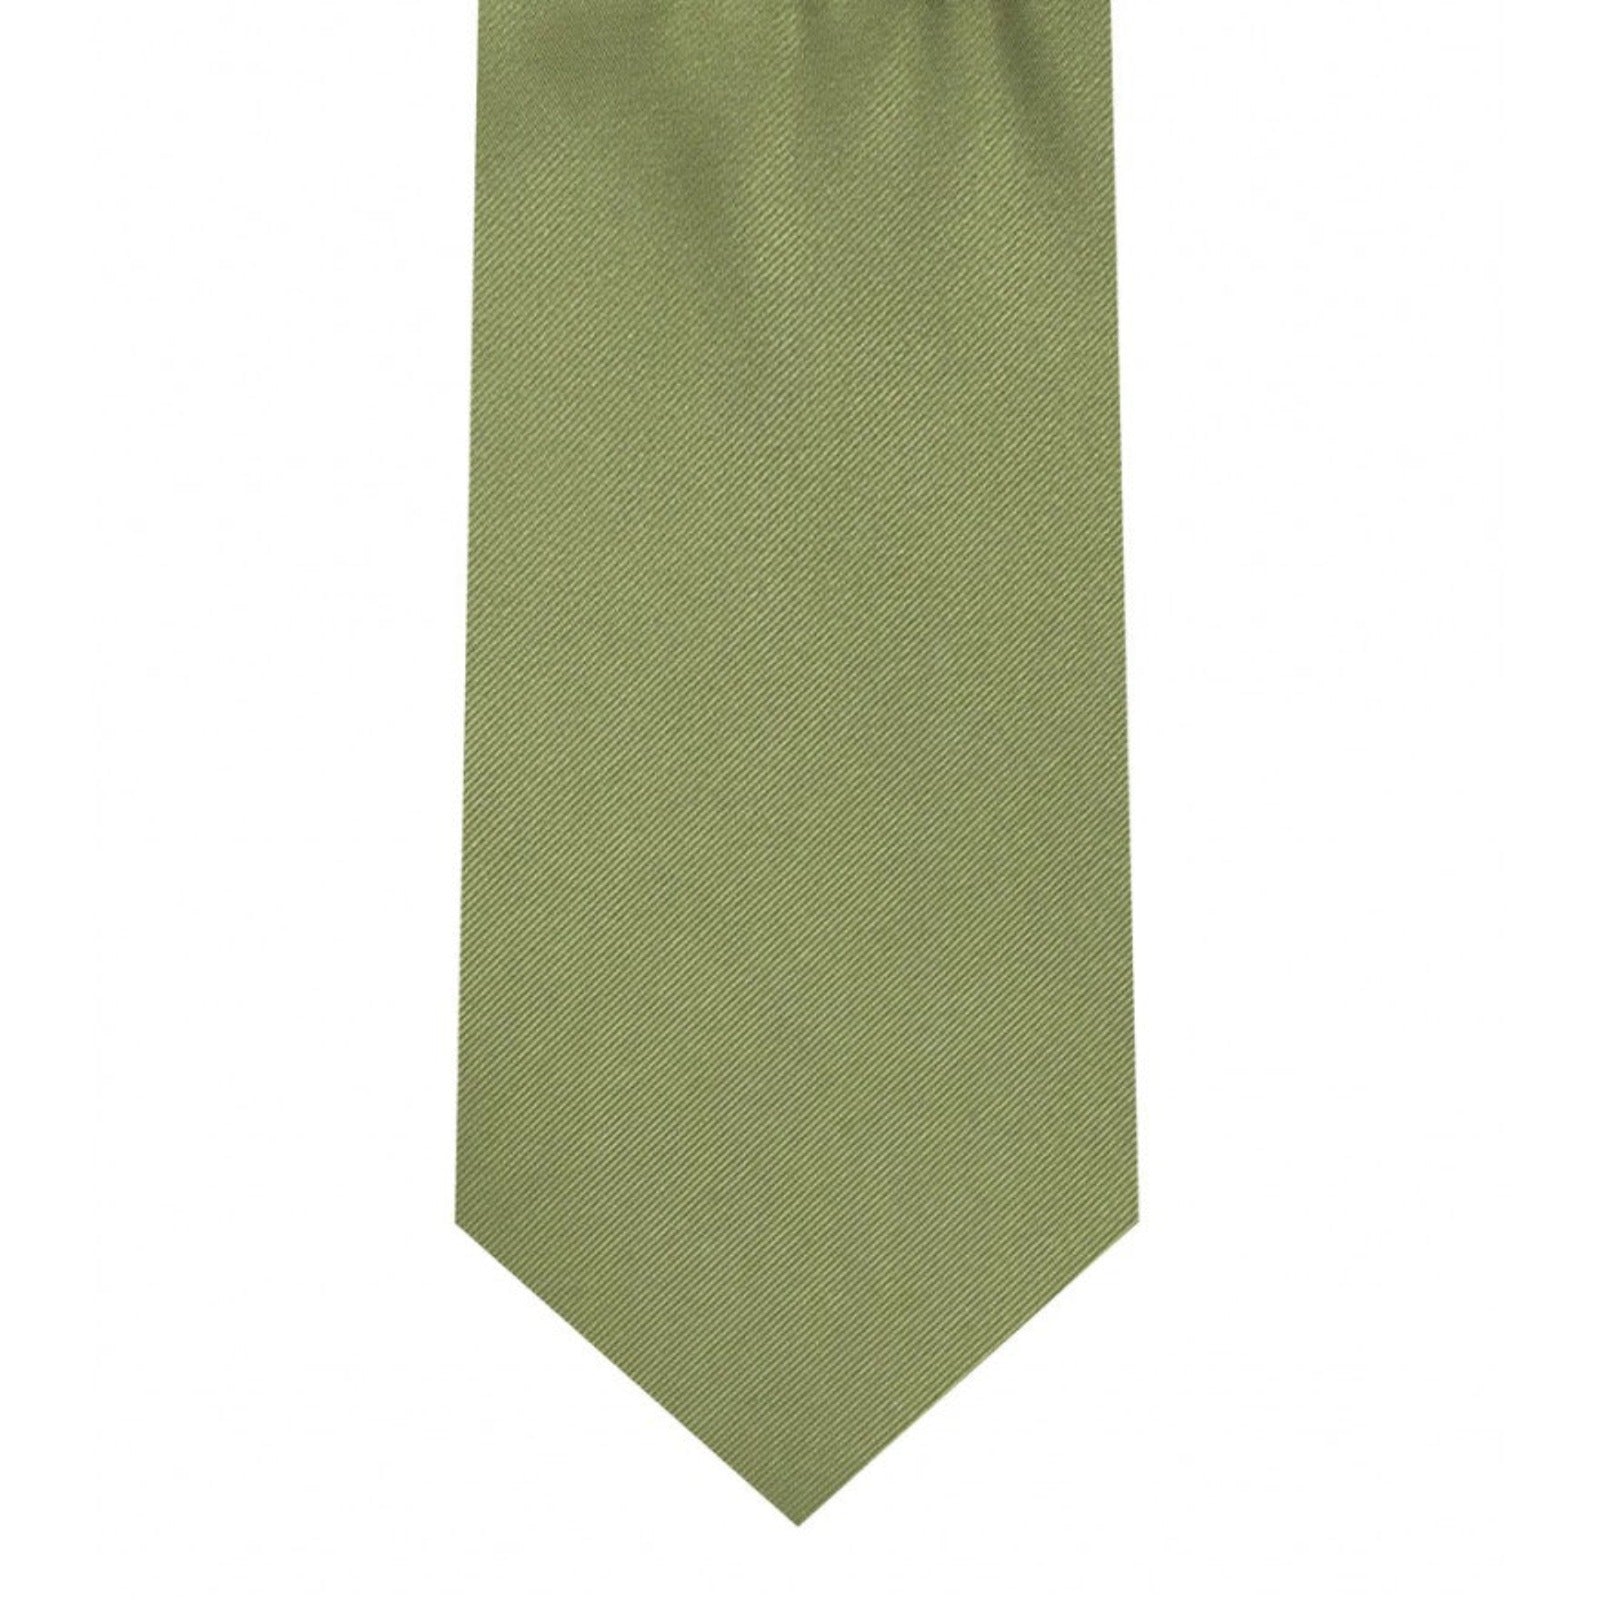 Classic Olive Green Tie Skinny width 2.75 inches With Matching Pocket Square | KCT Menswear